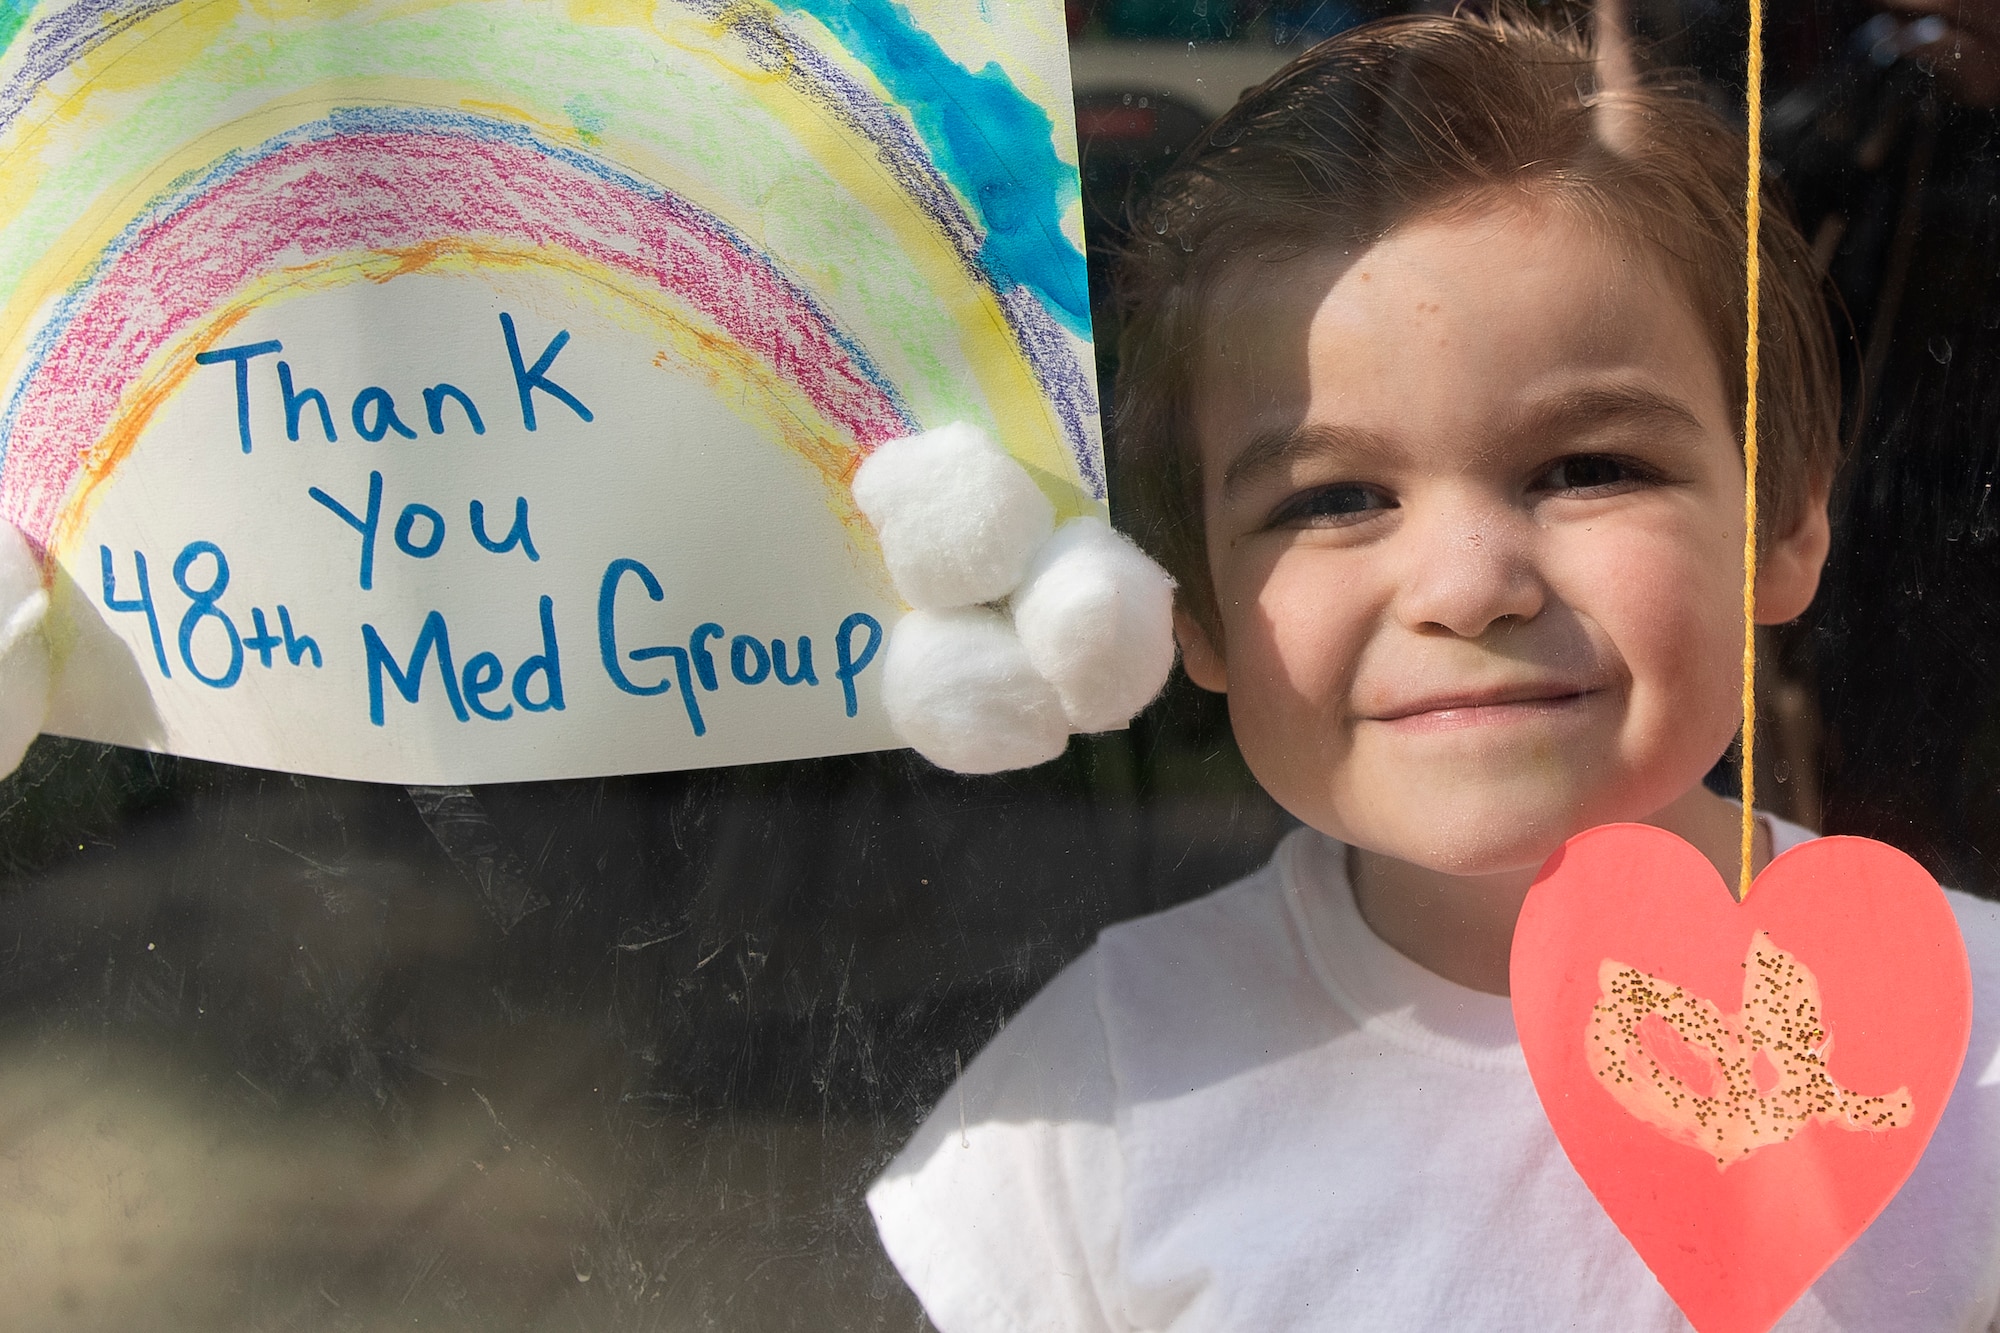 A child of a U.S. Air Force Airman displays artwork in their window in Liberty Village at Royal Air Force Lakenheath, England, April 22, 2020. The rainbow is a symbol of positivity and is often combined with a message of support for medical professionals serving on the front lines during the current COVID-19 crisis. (U.S. Air Force photo by Airman 1st Class Jessi Monte)